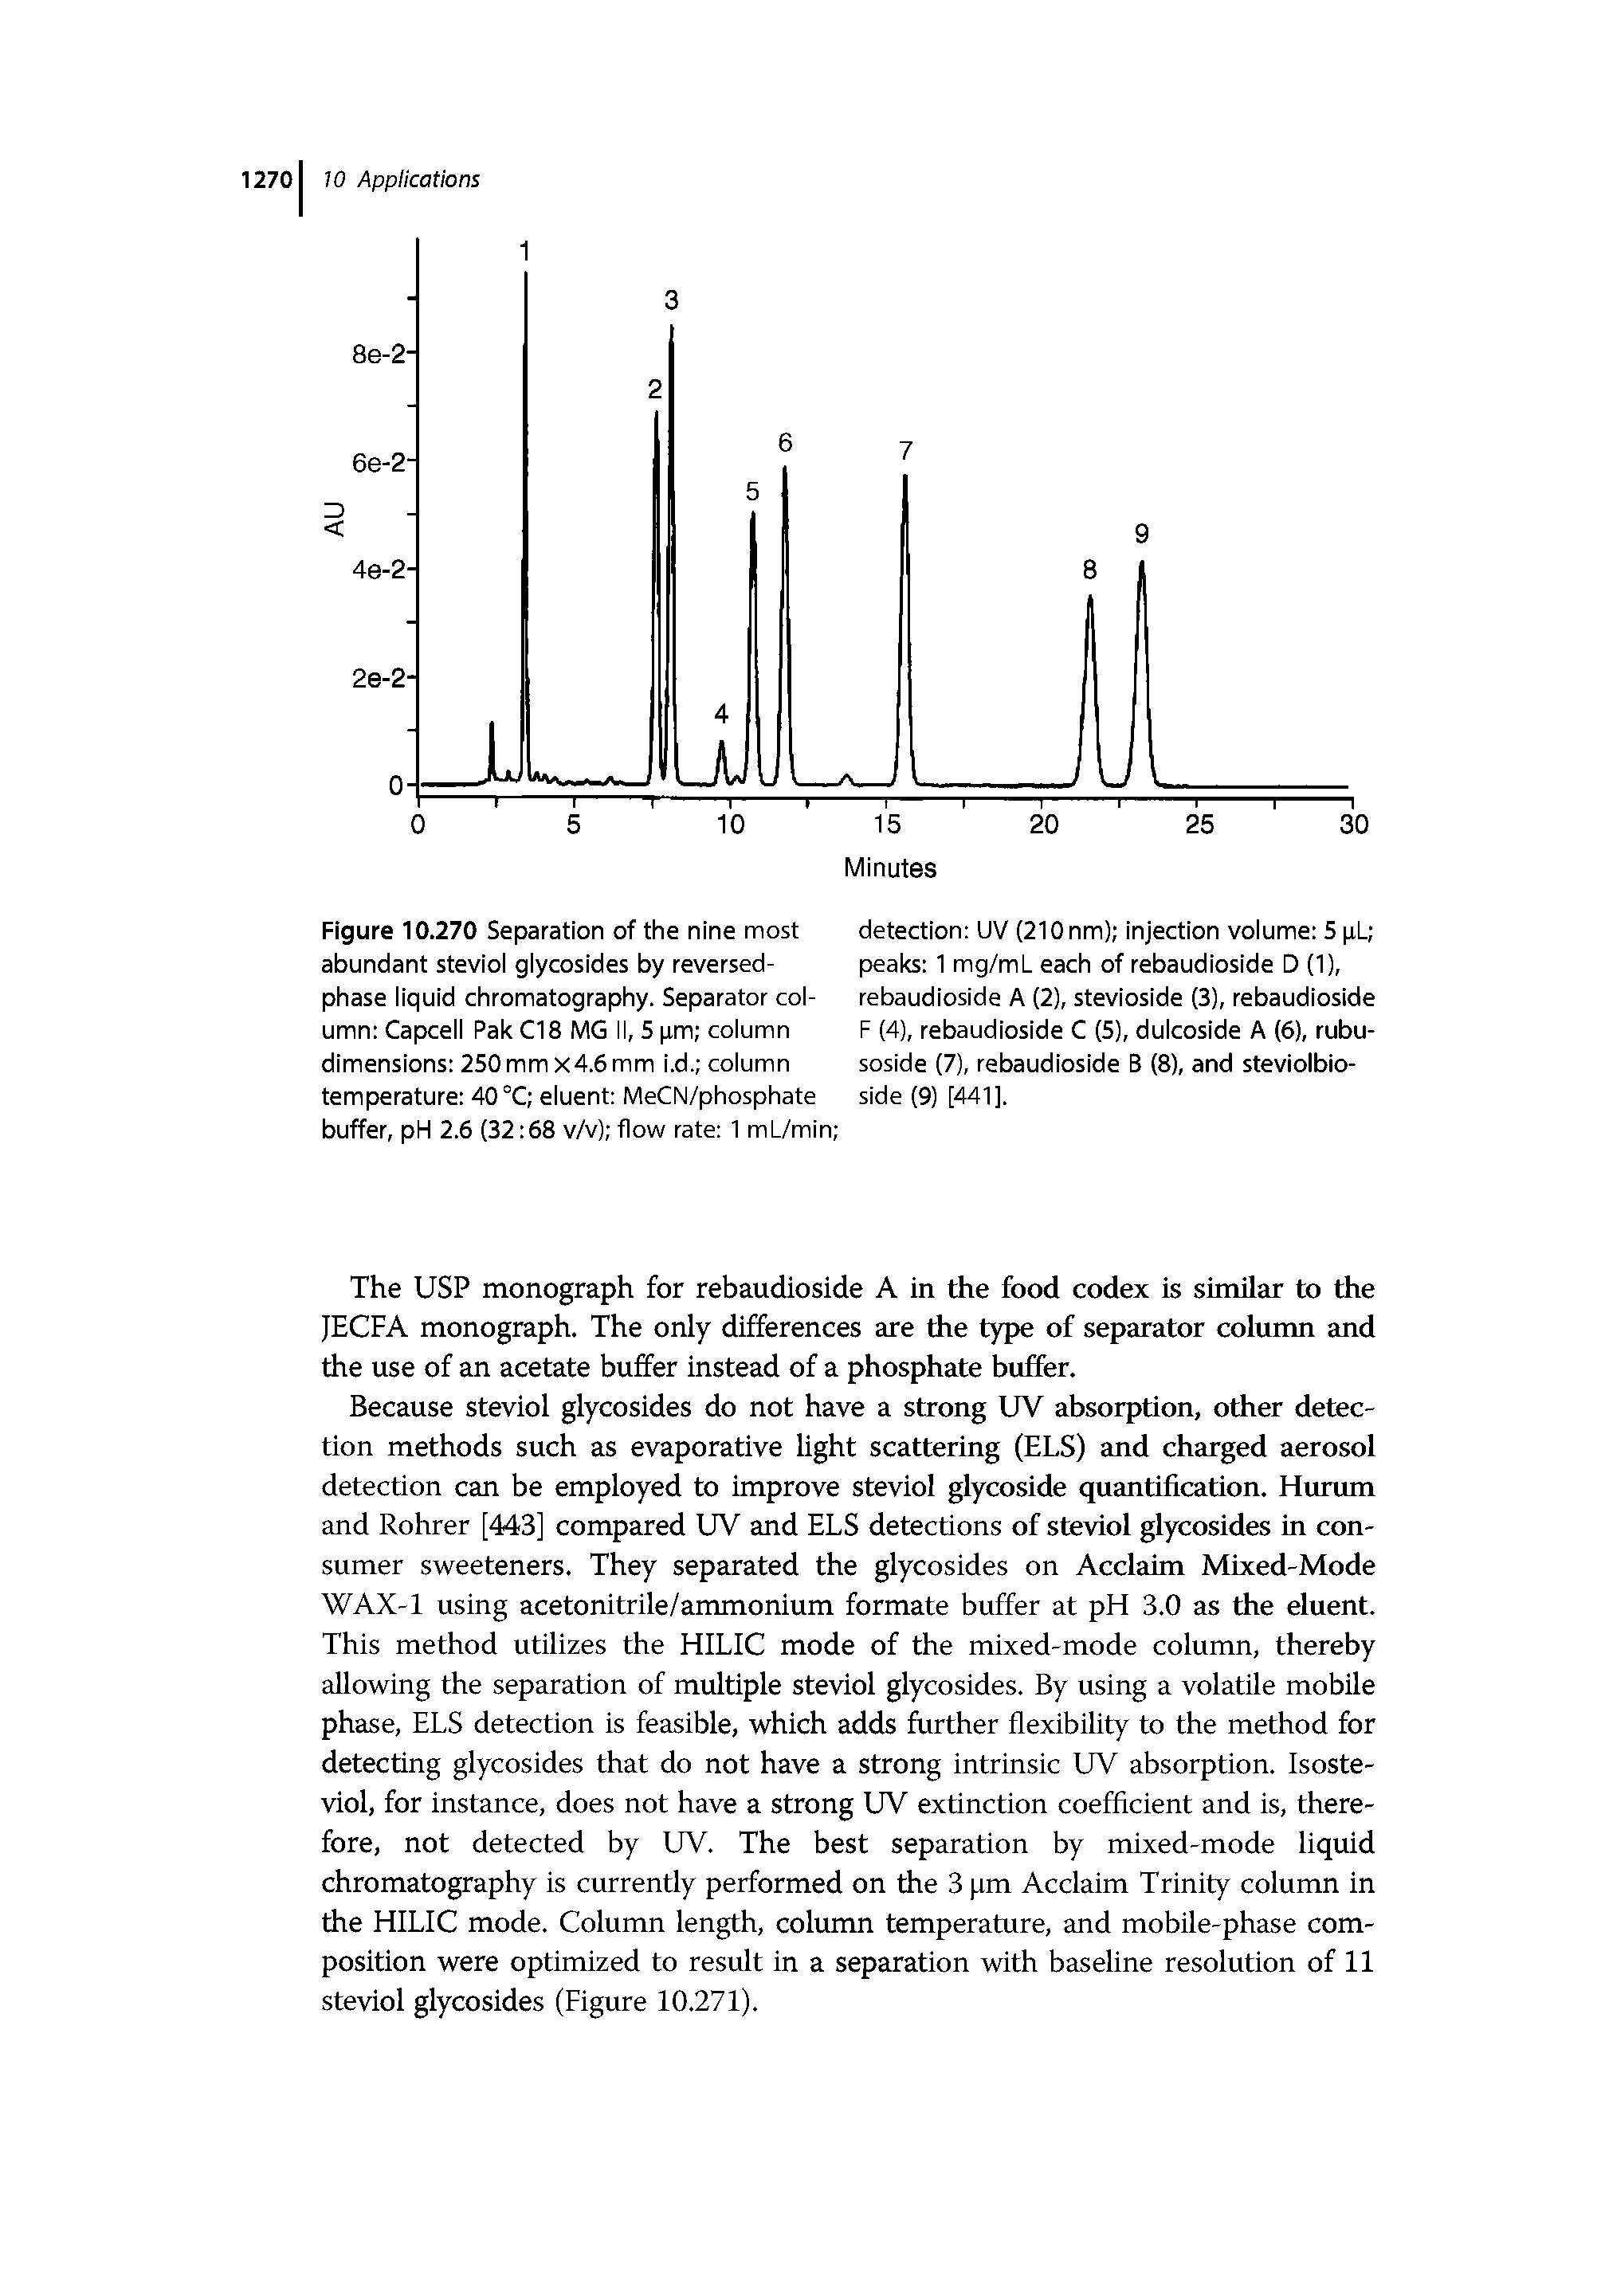 Figure 10.270 Separation of the nine most abundant steviol glycosides by reversed-phase liquid chromatography. Separator column Capcell Pak CIS MG II, 5 pm column dimensions 250mmx4.6mm i.d. column temperature 40°C eluent MeCN/phosphate buffer, pH 2.6 (32 68 v/v) flow rate 1 mlVmin ...